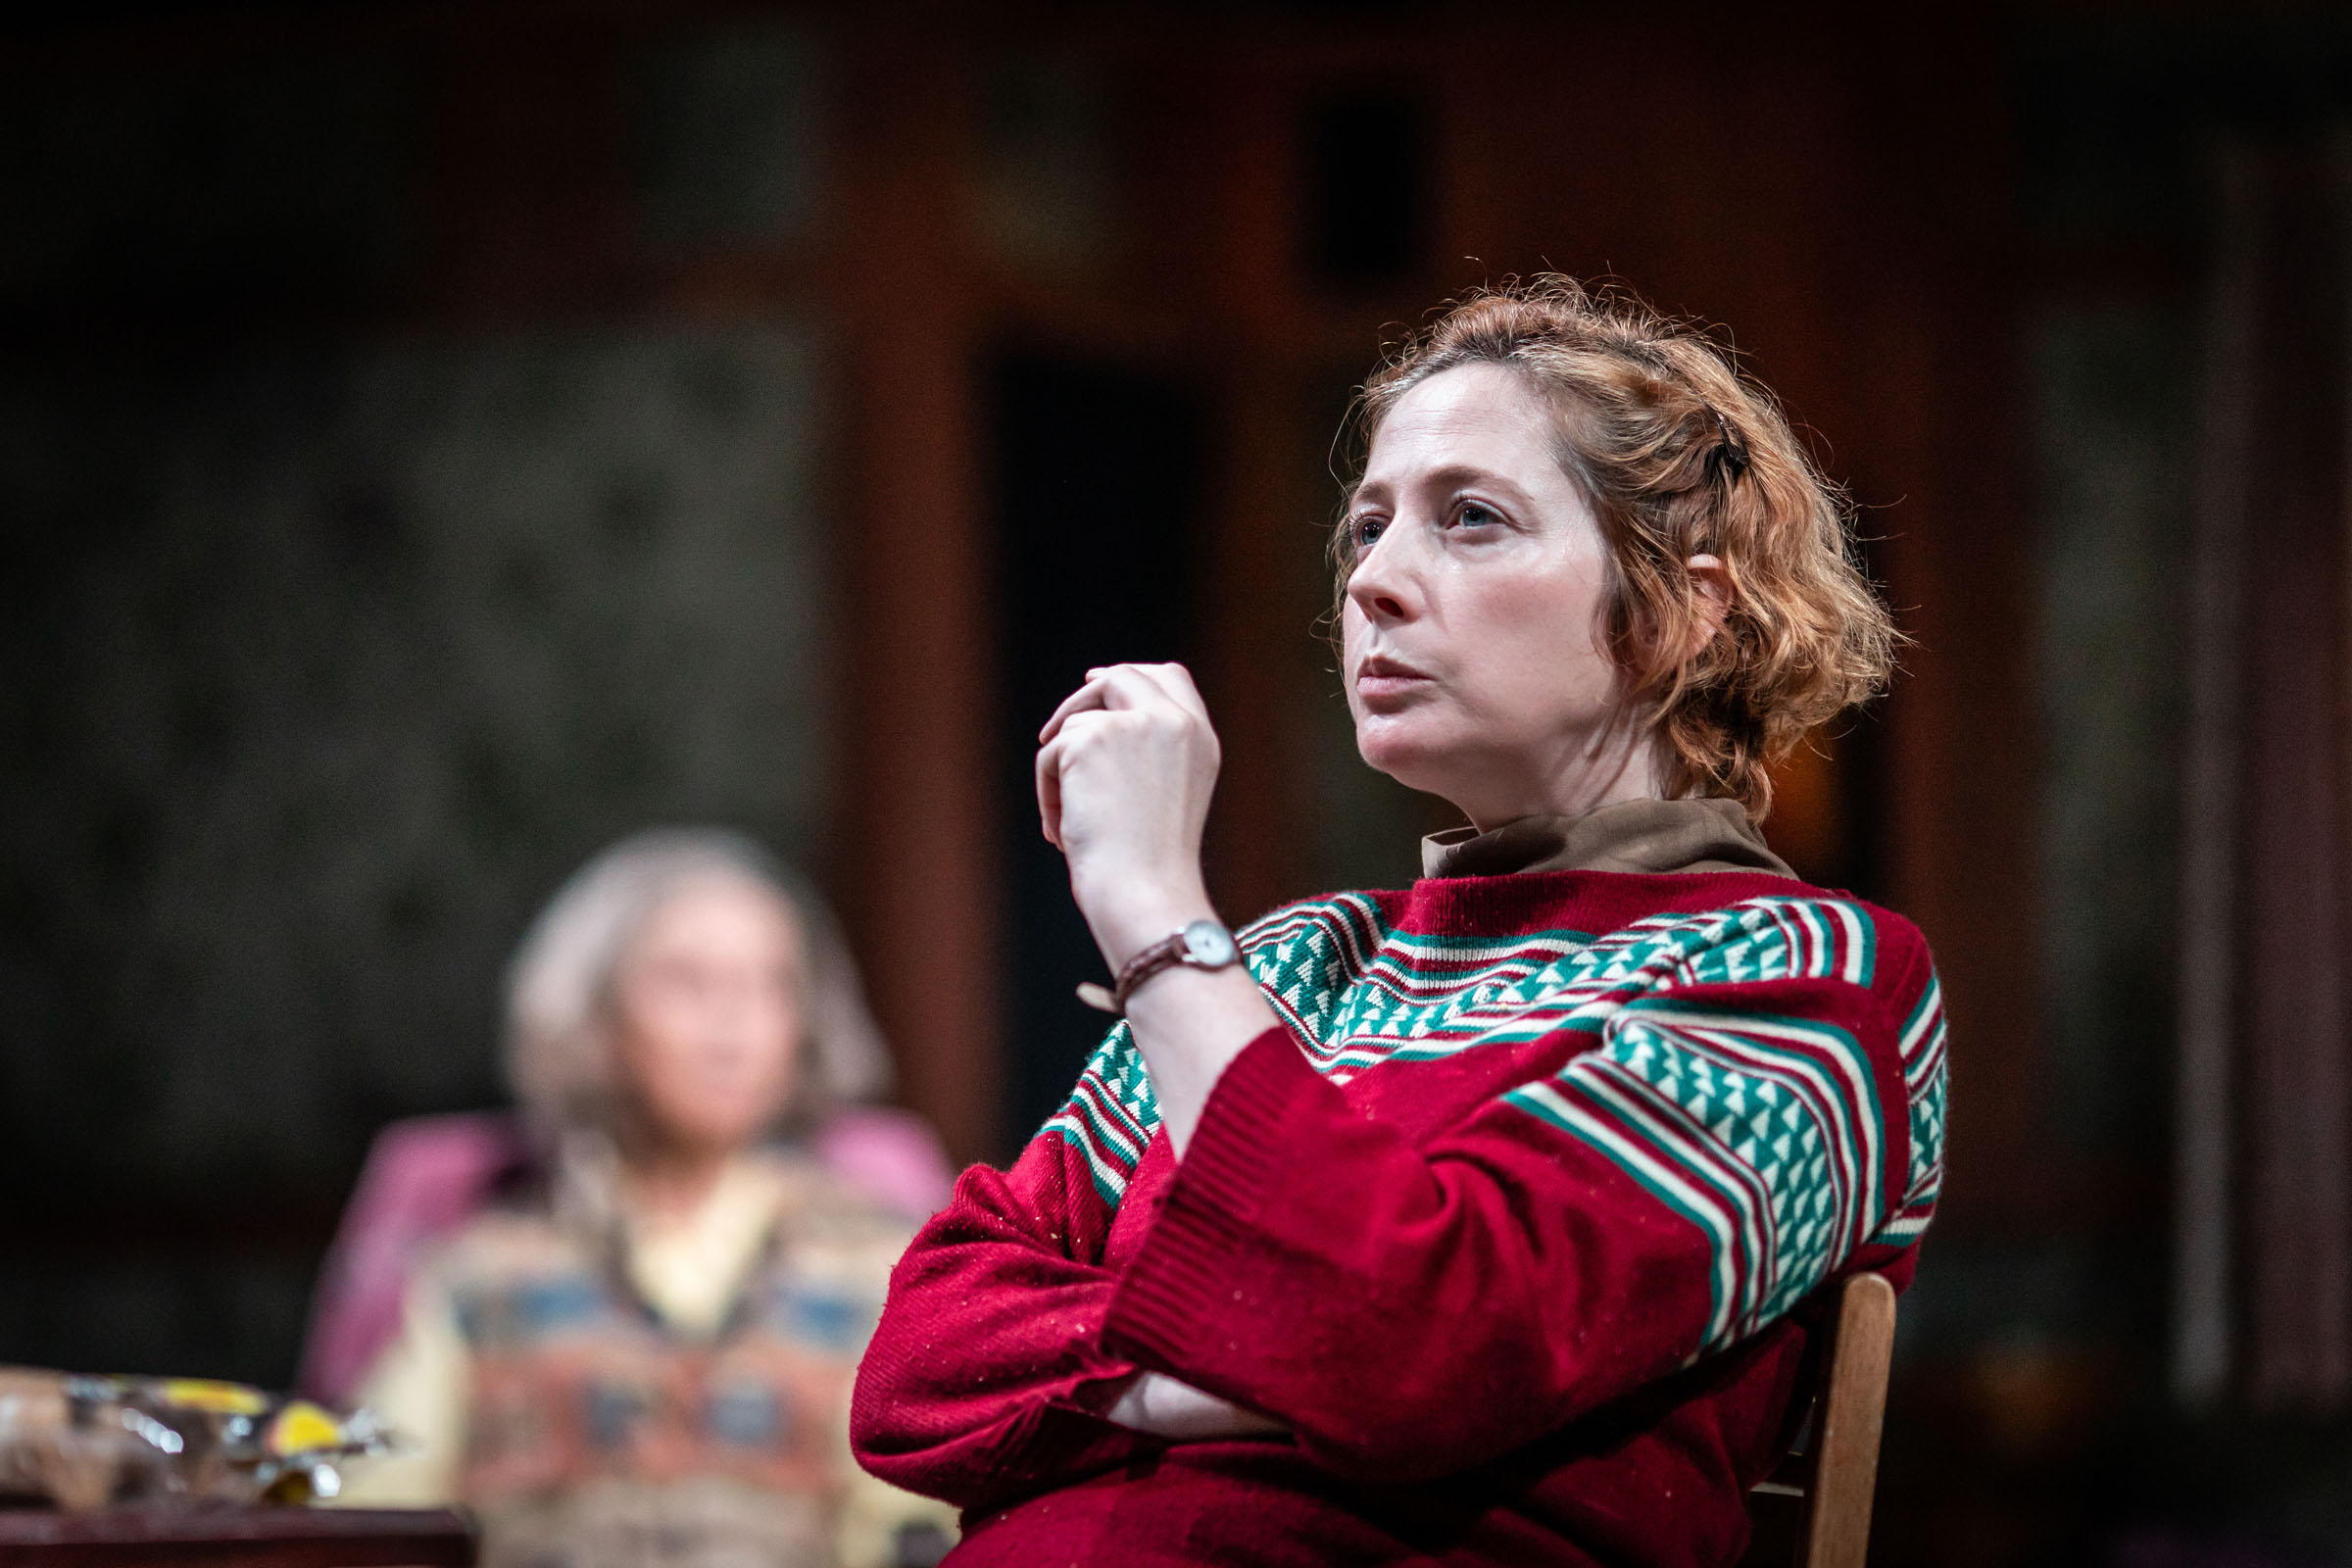 Orla Fitzgerald as Maureen Folan in The Beauty Queen of Leenane